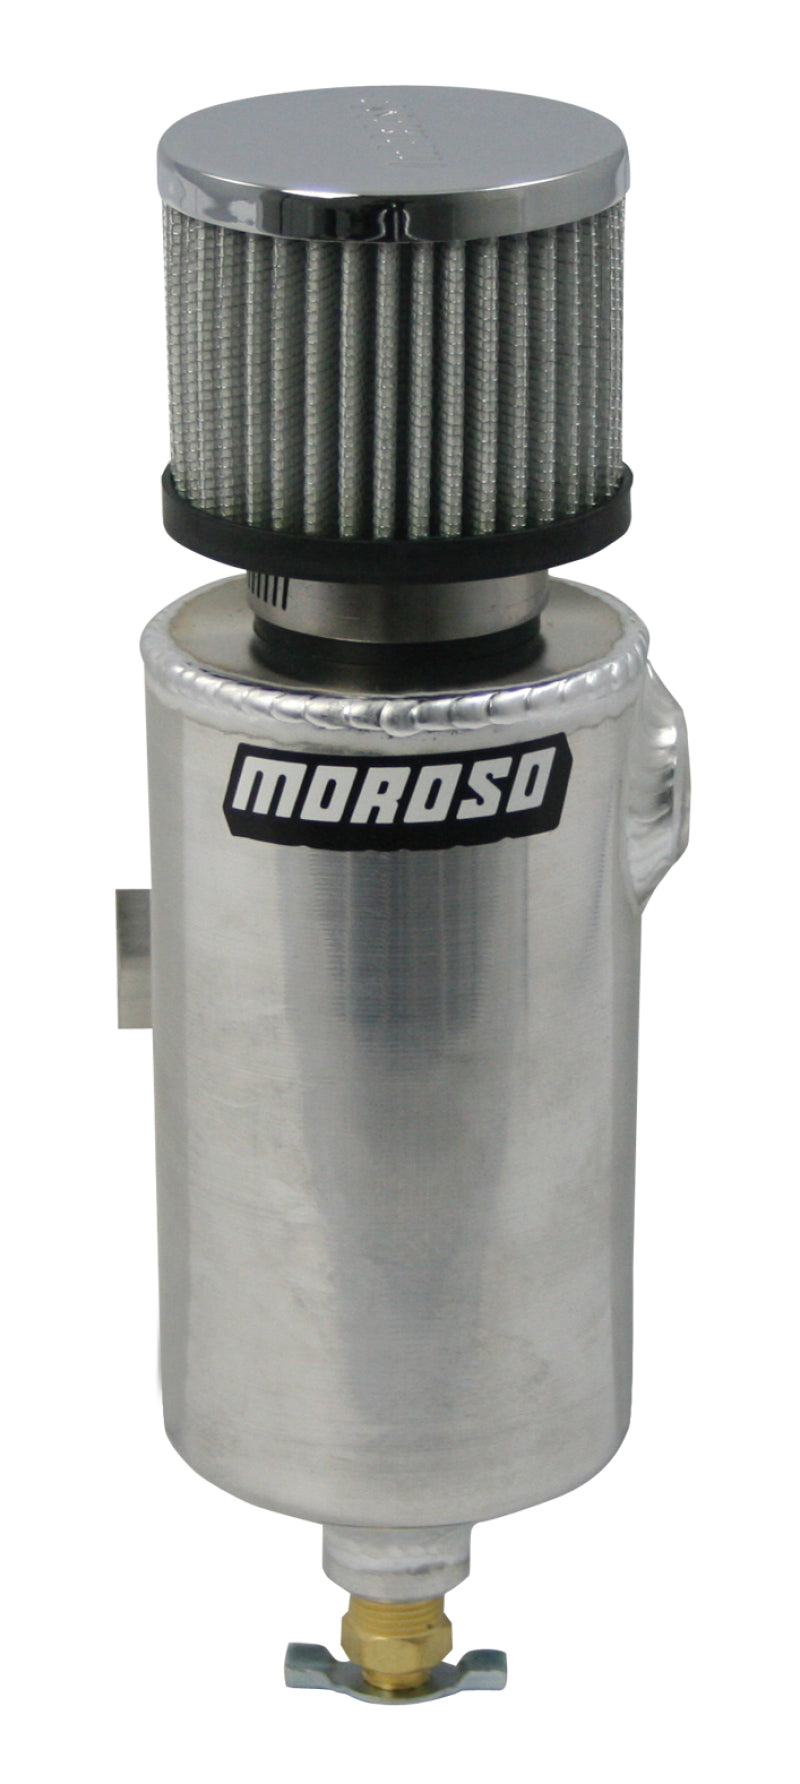 Moroso Breather Tank/Catch Can - 1/2in NPT Female Fitting - Roll Bar Mount - Aluminum